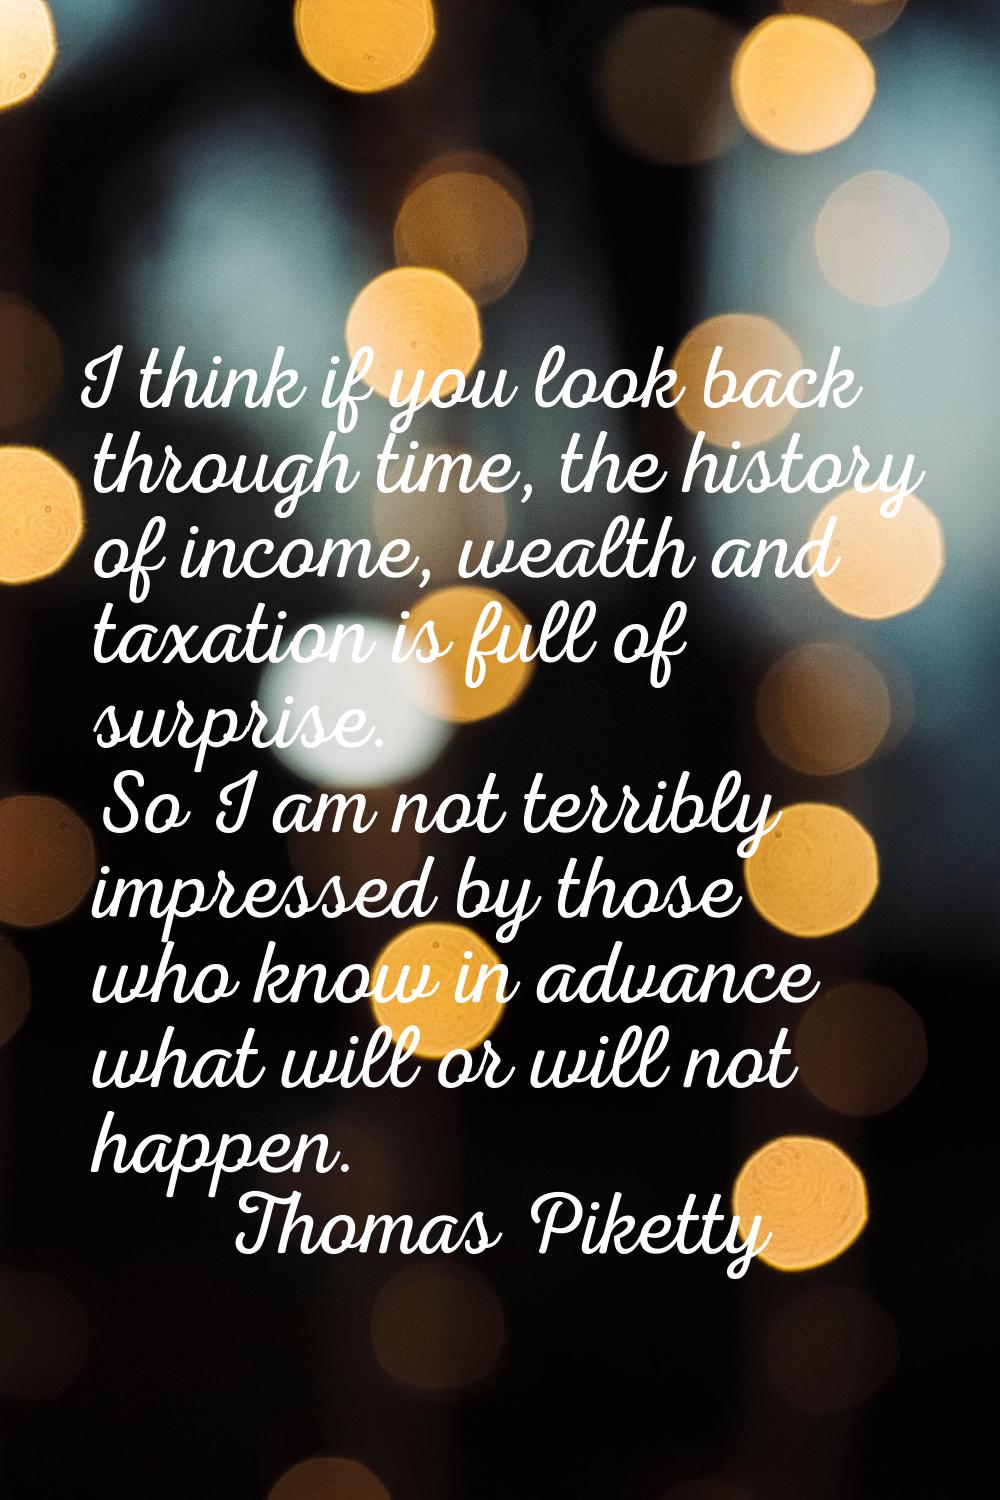 I think if you look back through time, the history of income, wealth and taxation is full of surpri